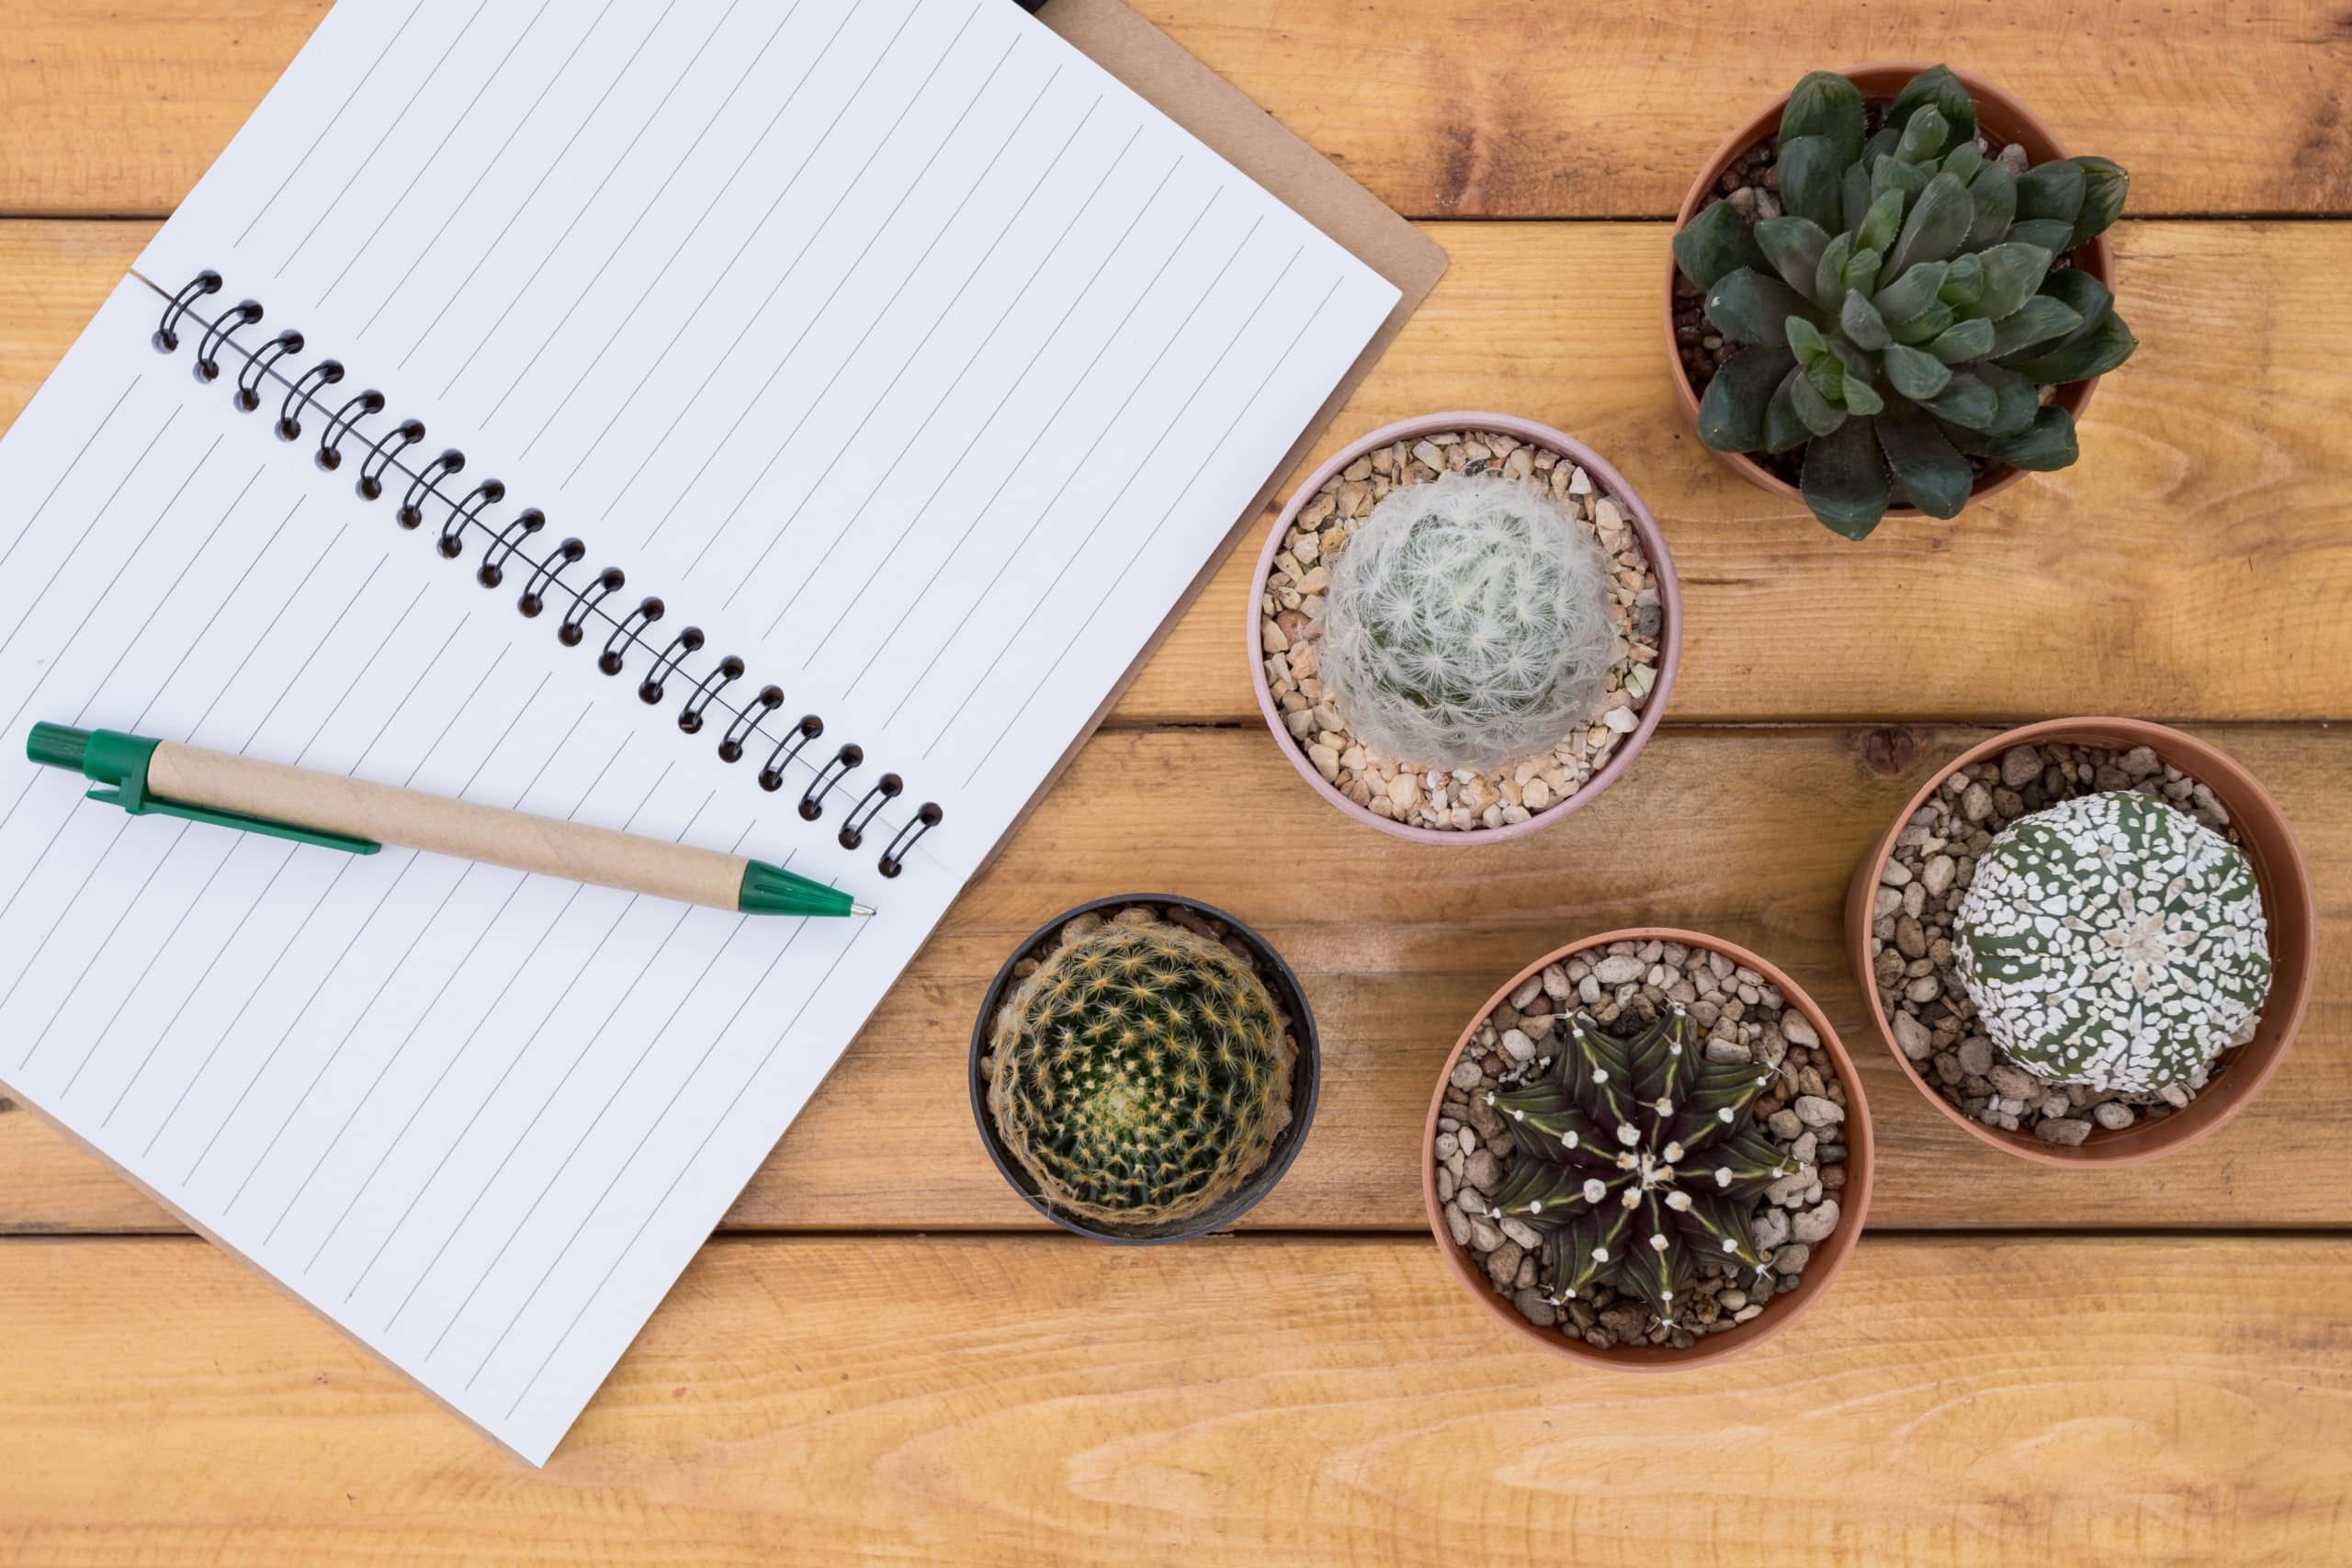 open notebook and a pen on top, and cactus plants on the wooden desk.